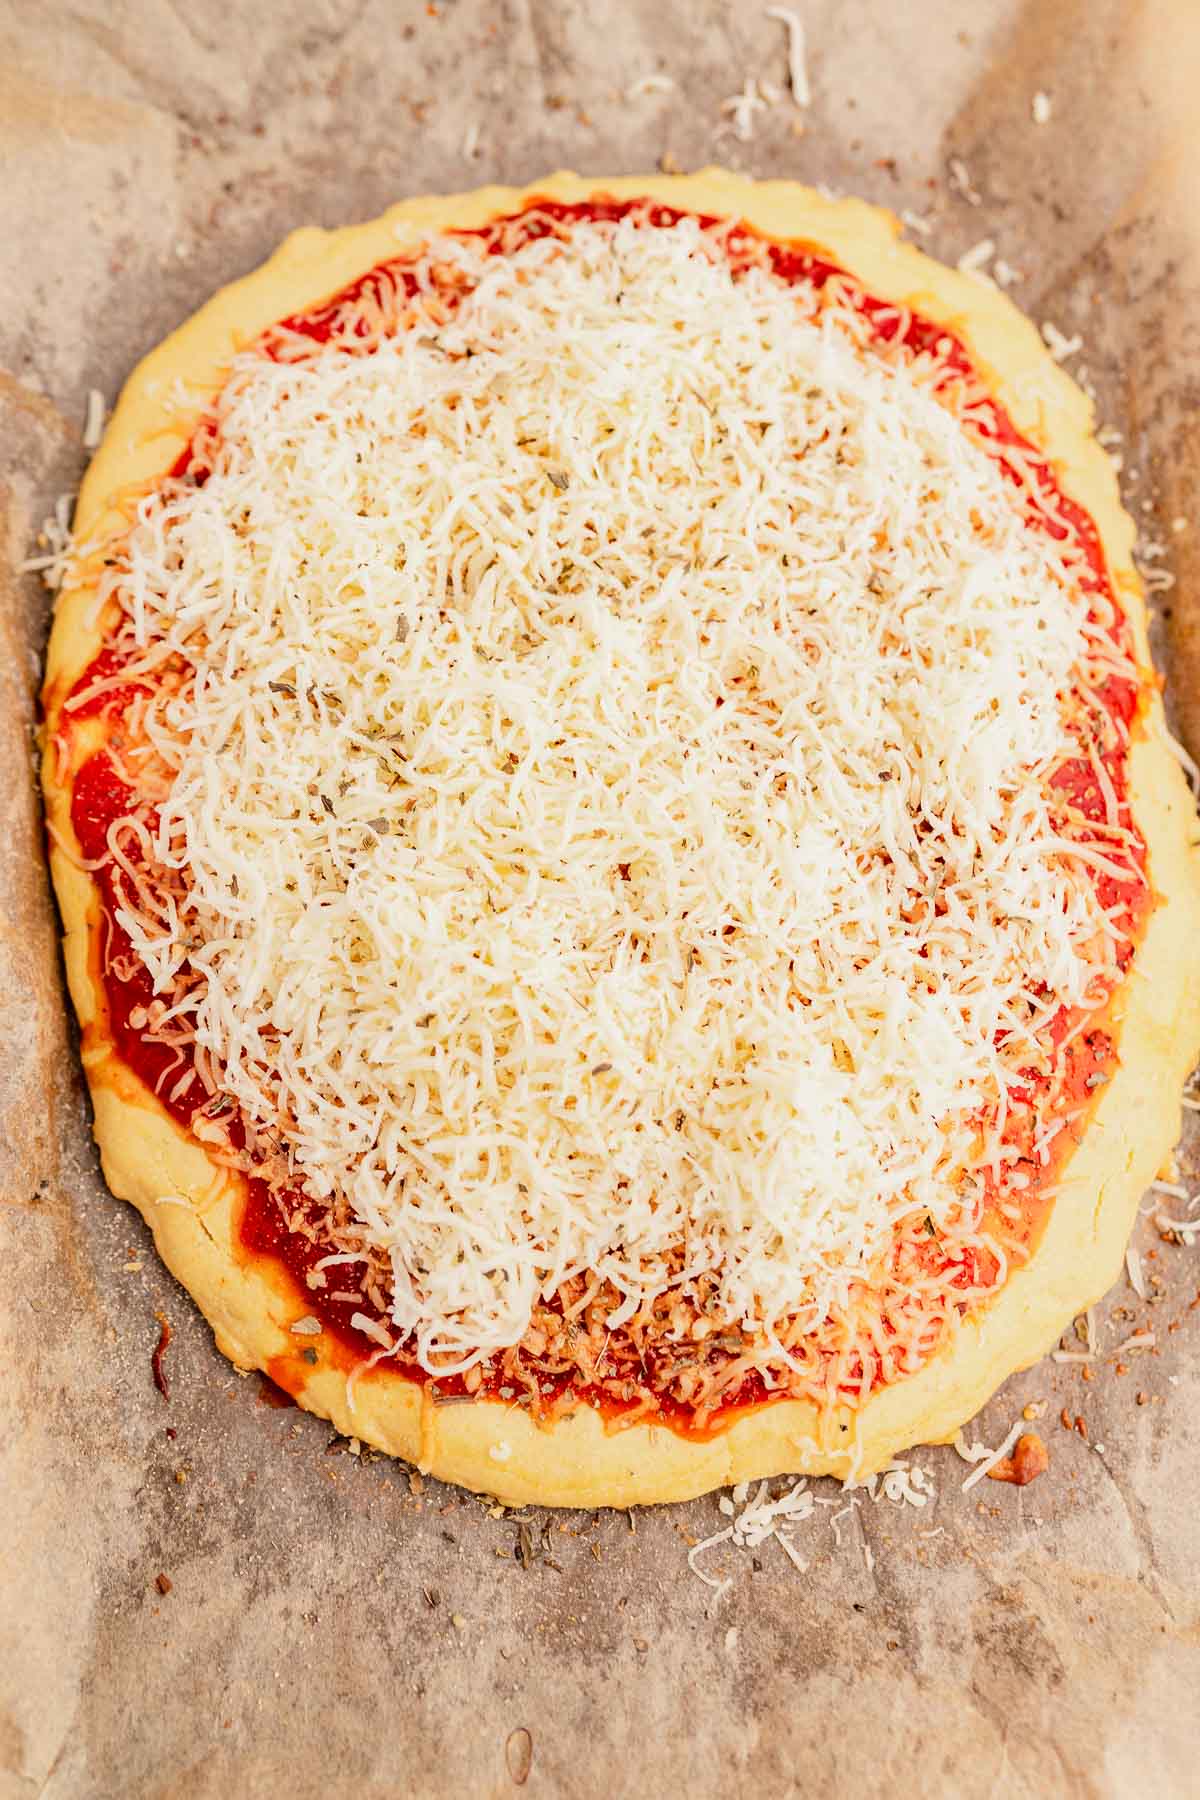 A freshly made chickpea flour pizza crust with a generous topping of shredded cheese and tomato sauce on a baking sheet.